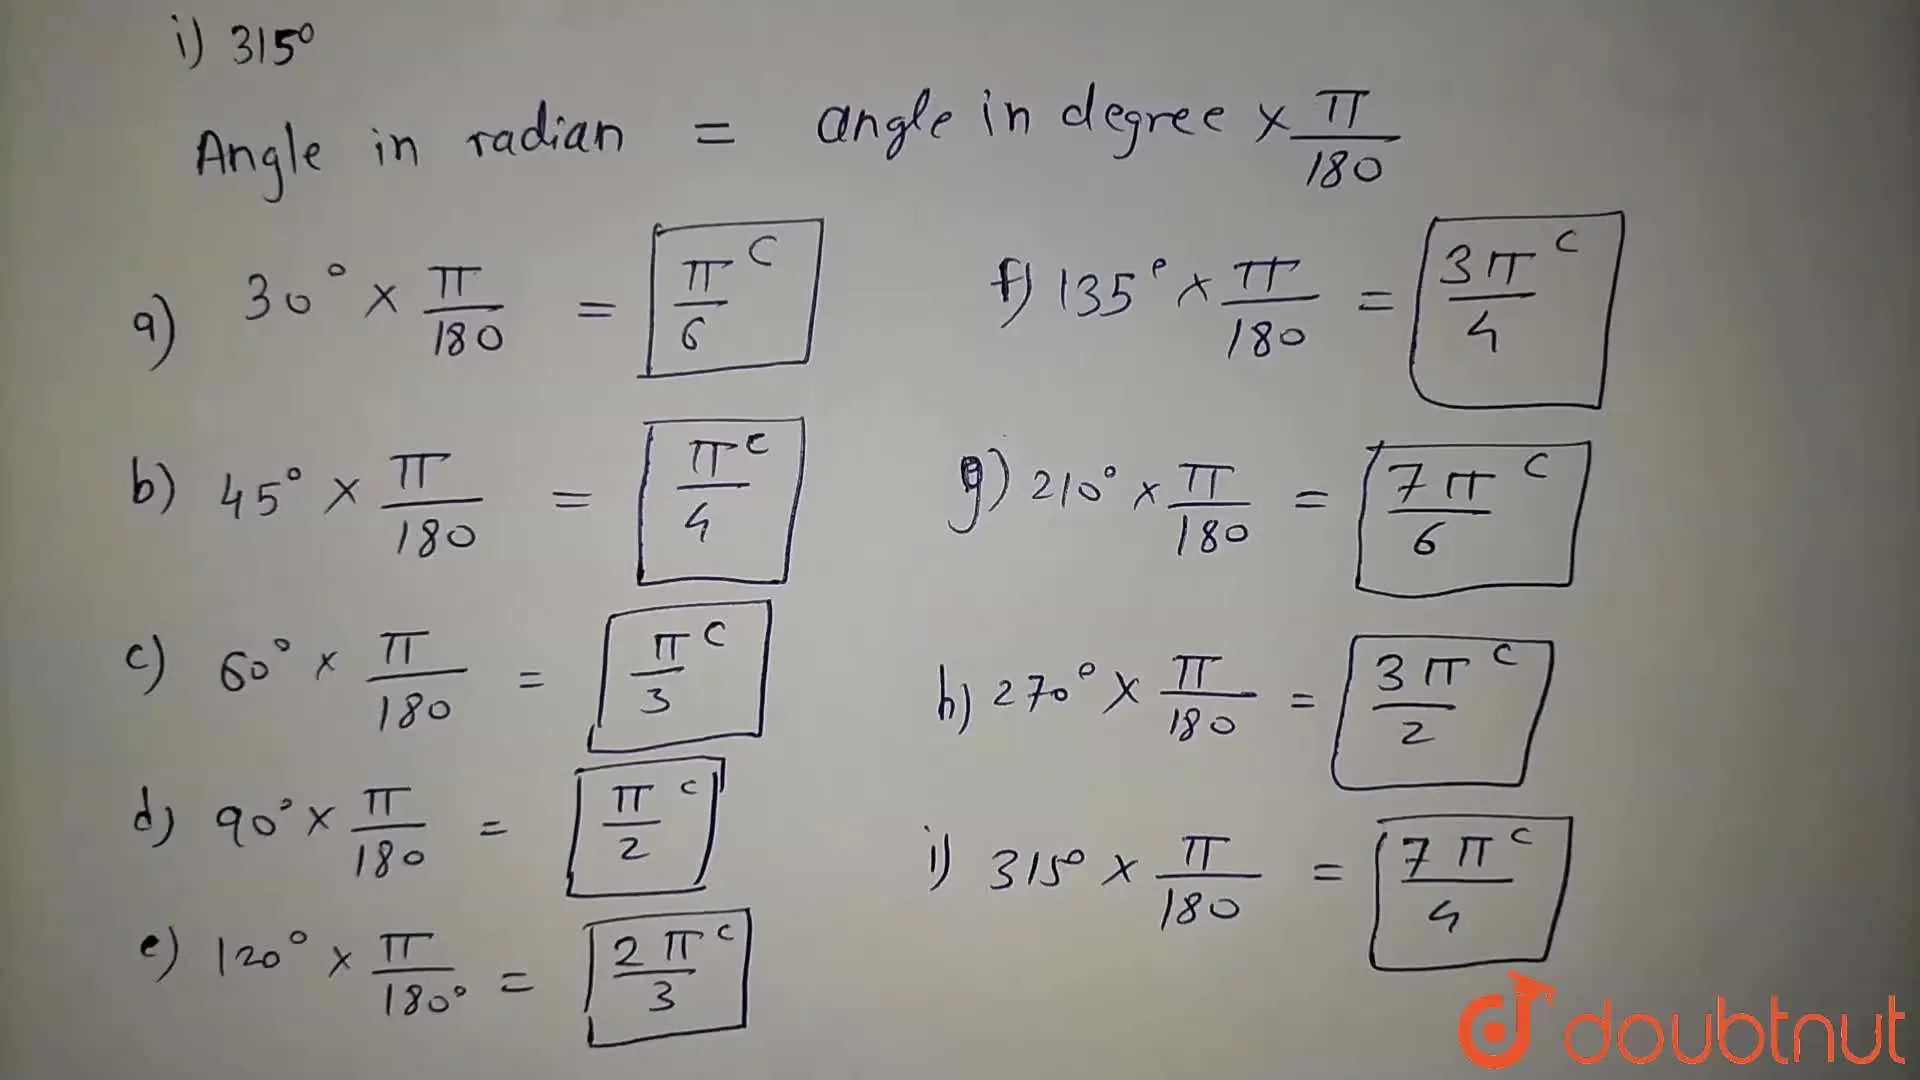 Convert the angle from degree to radian : {:((a) 30^(@),(b) 45^(